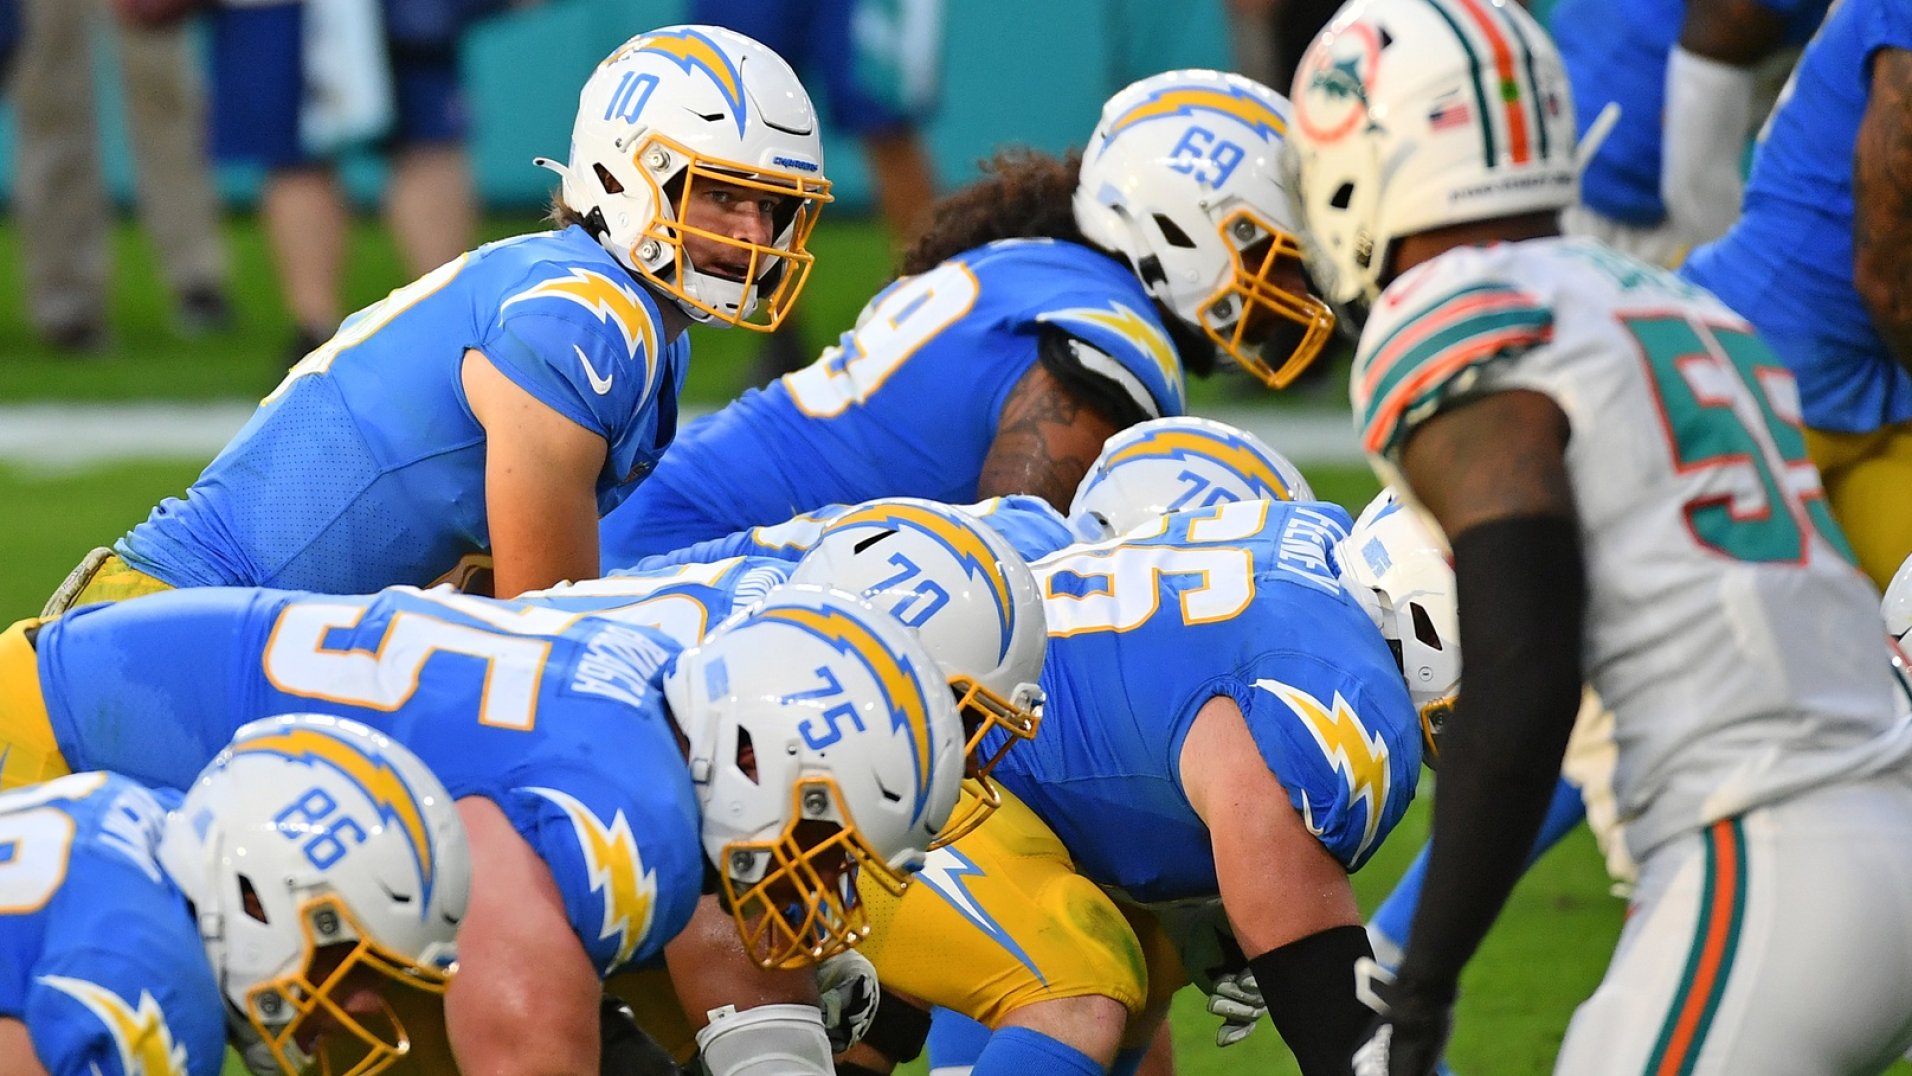 Linsey The Chargers' offensive line is the most improved positional